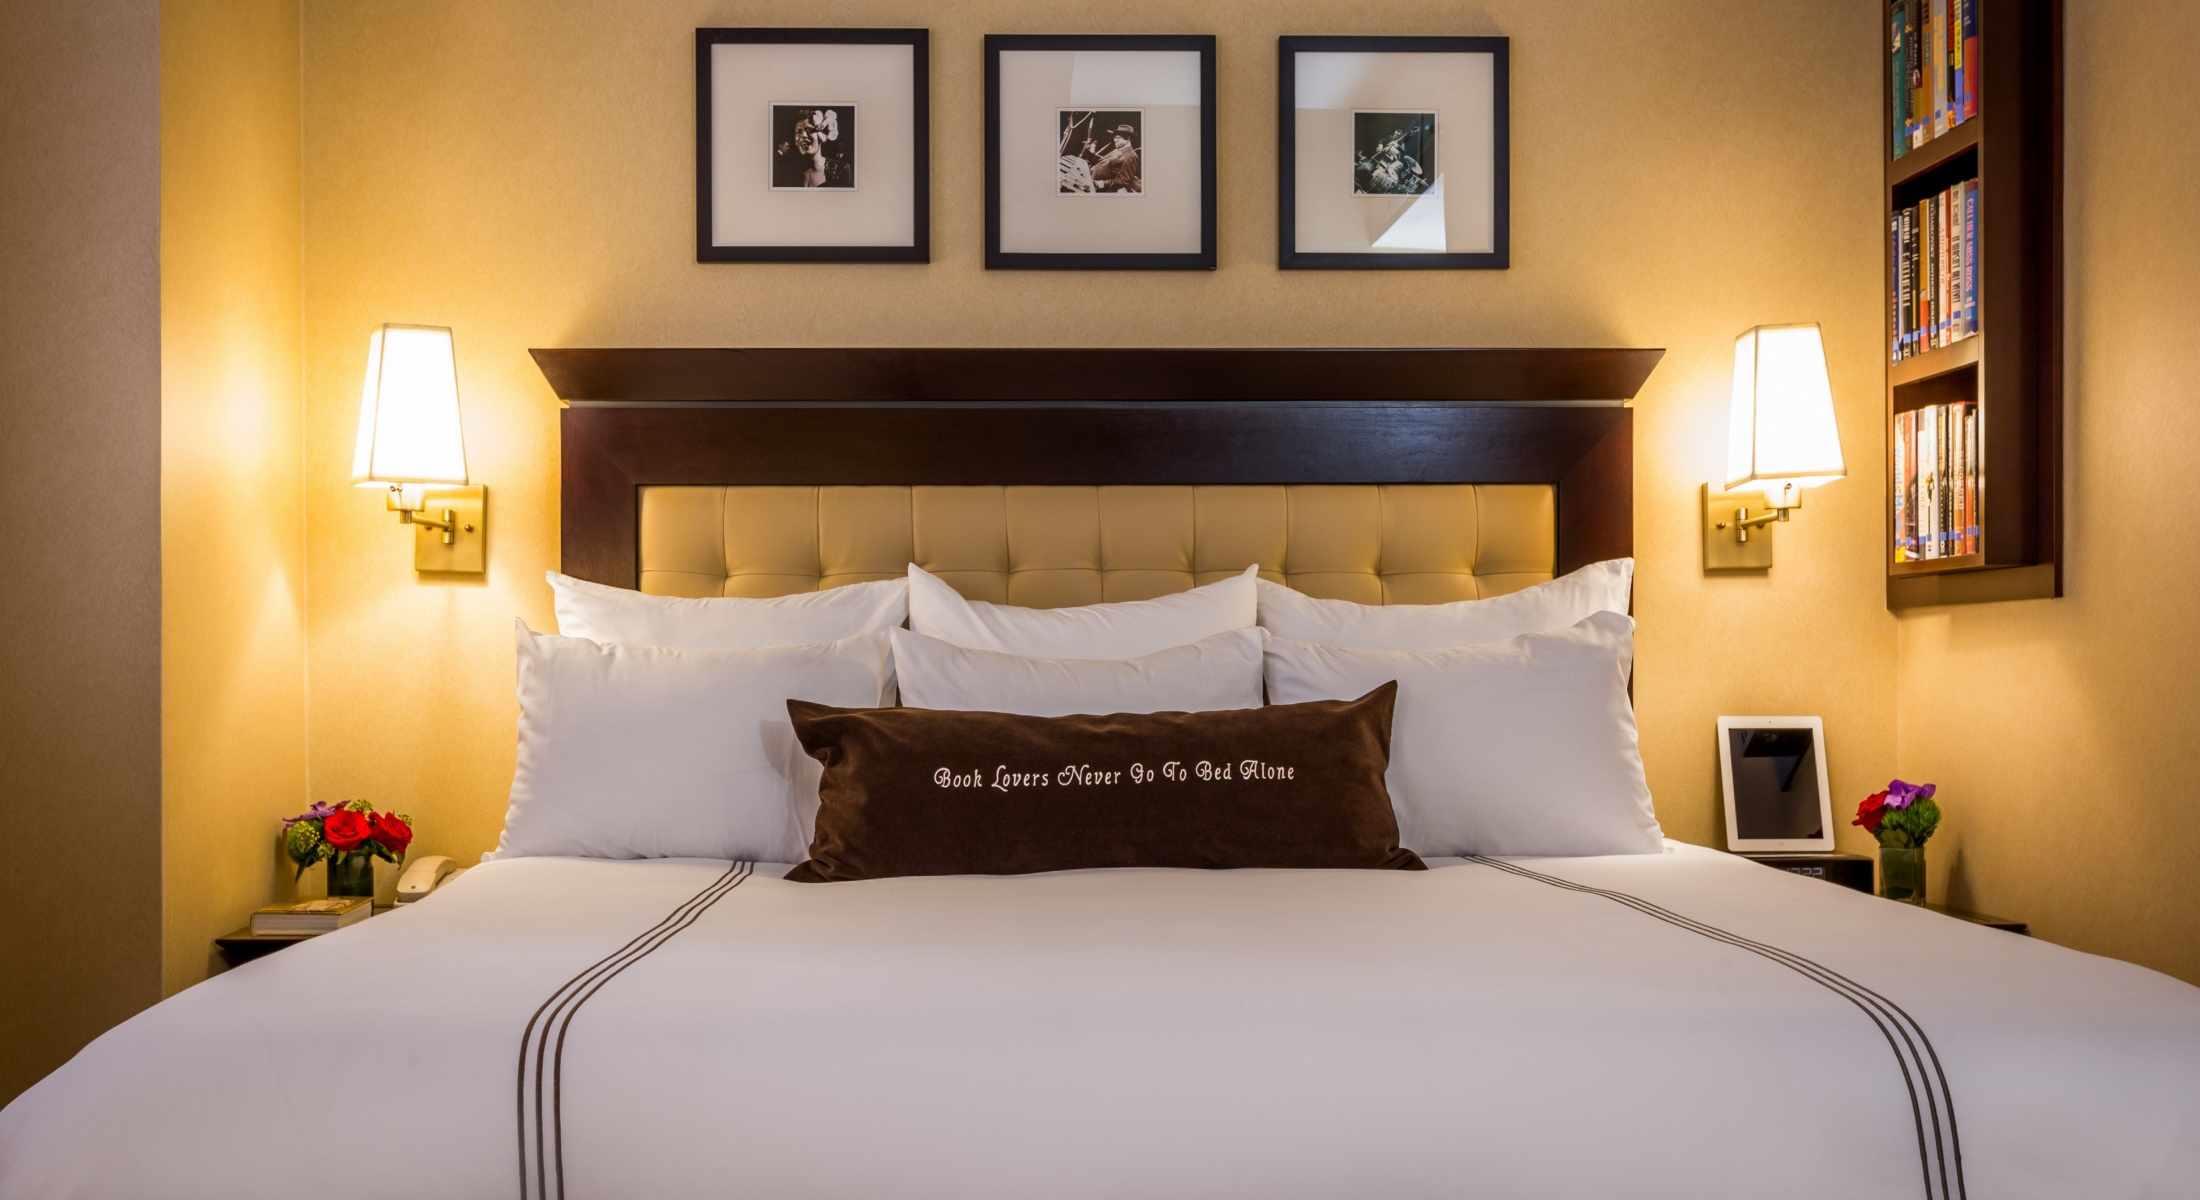 Deluxe Rooms with One King Bed and nightstands.